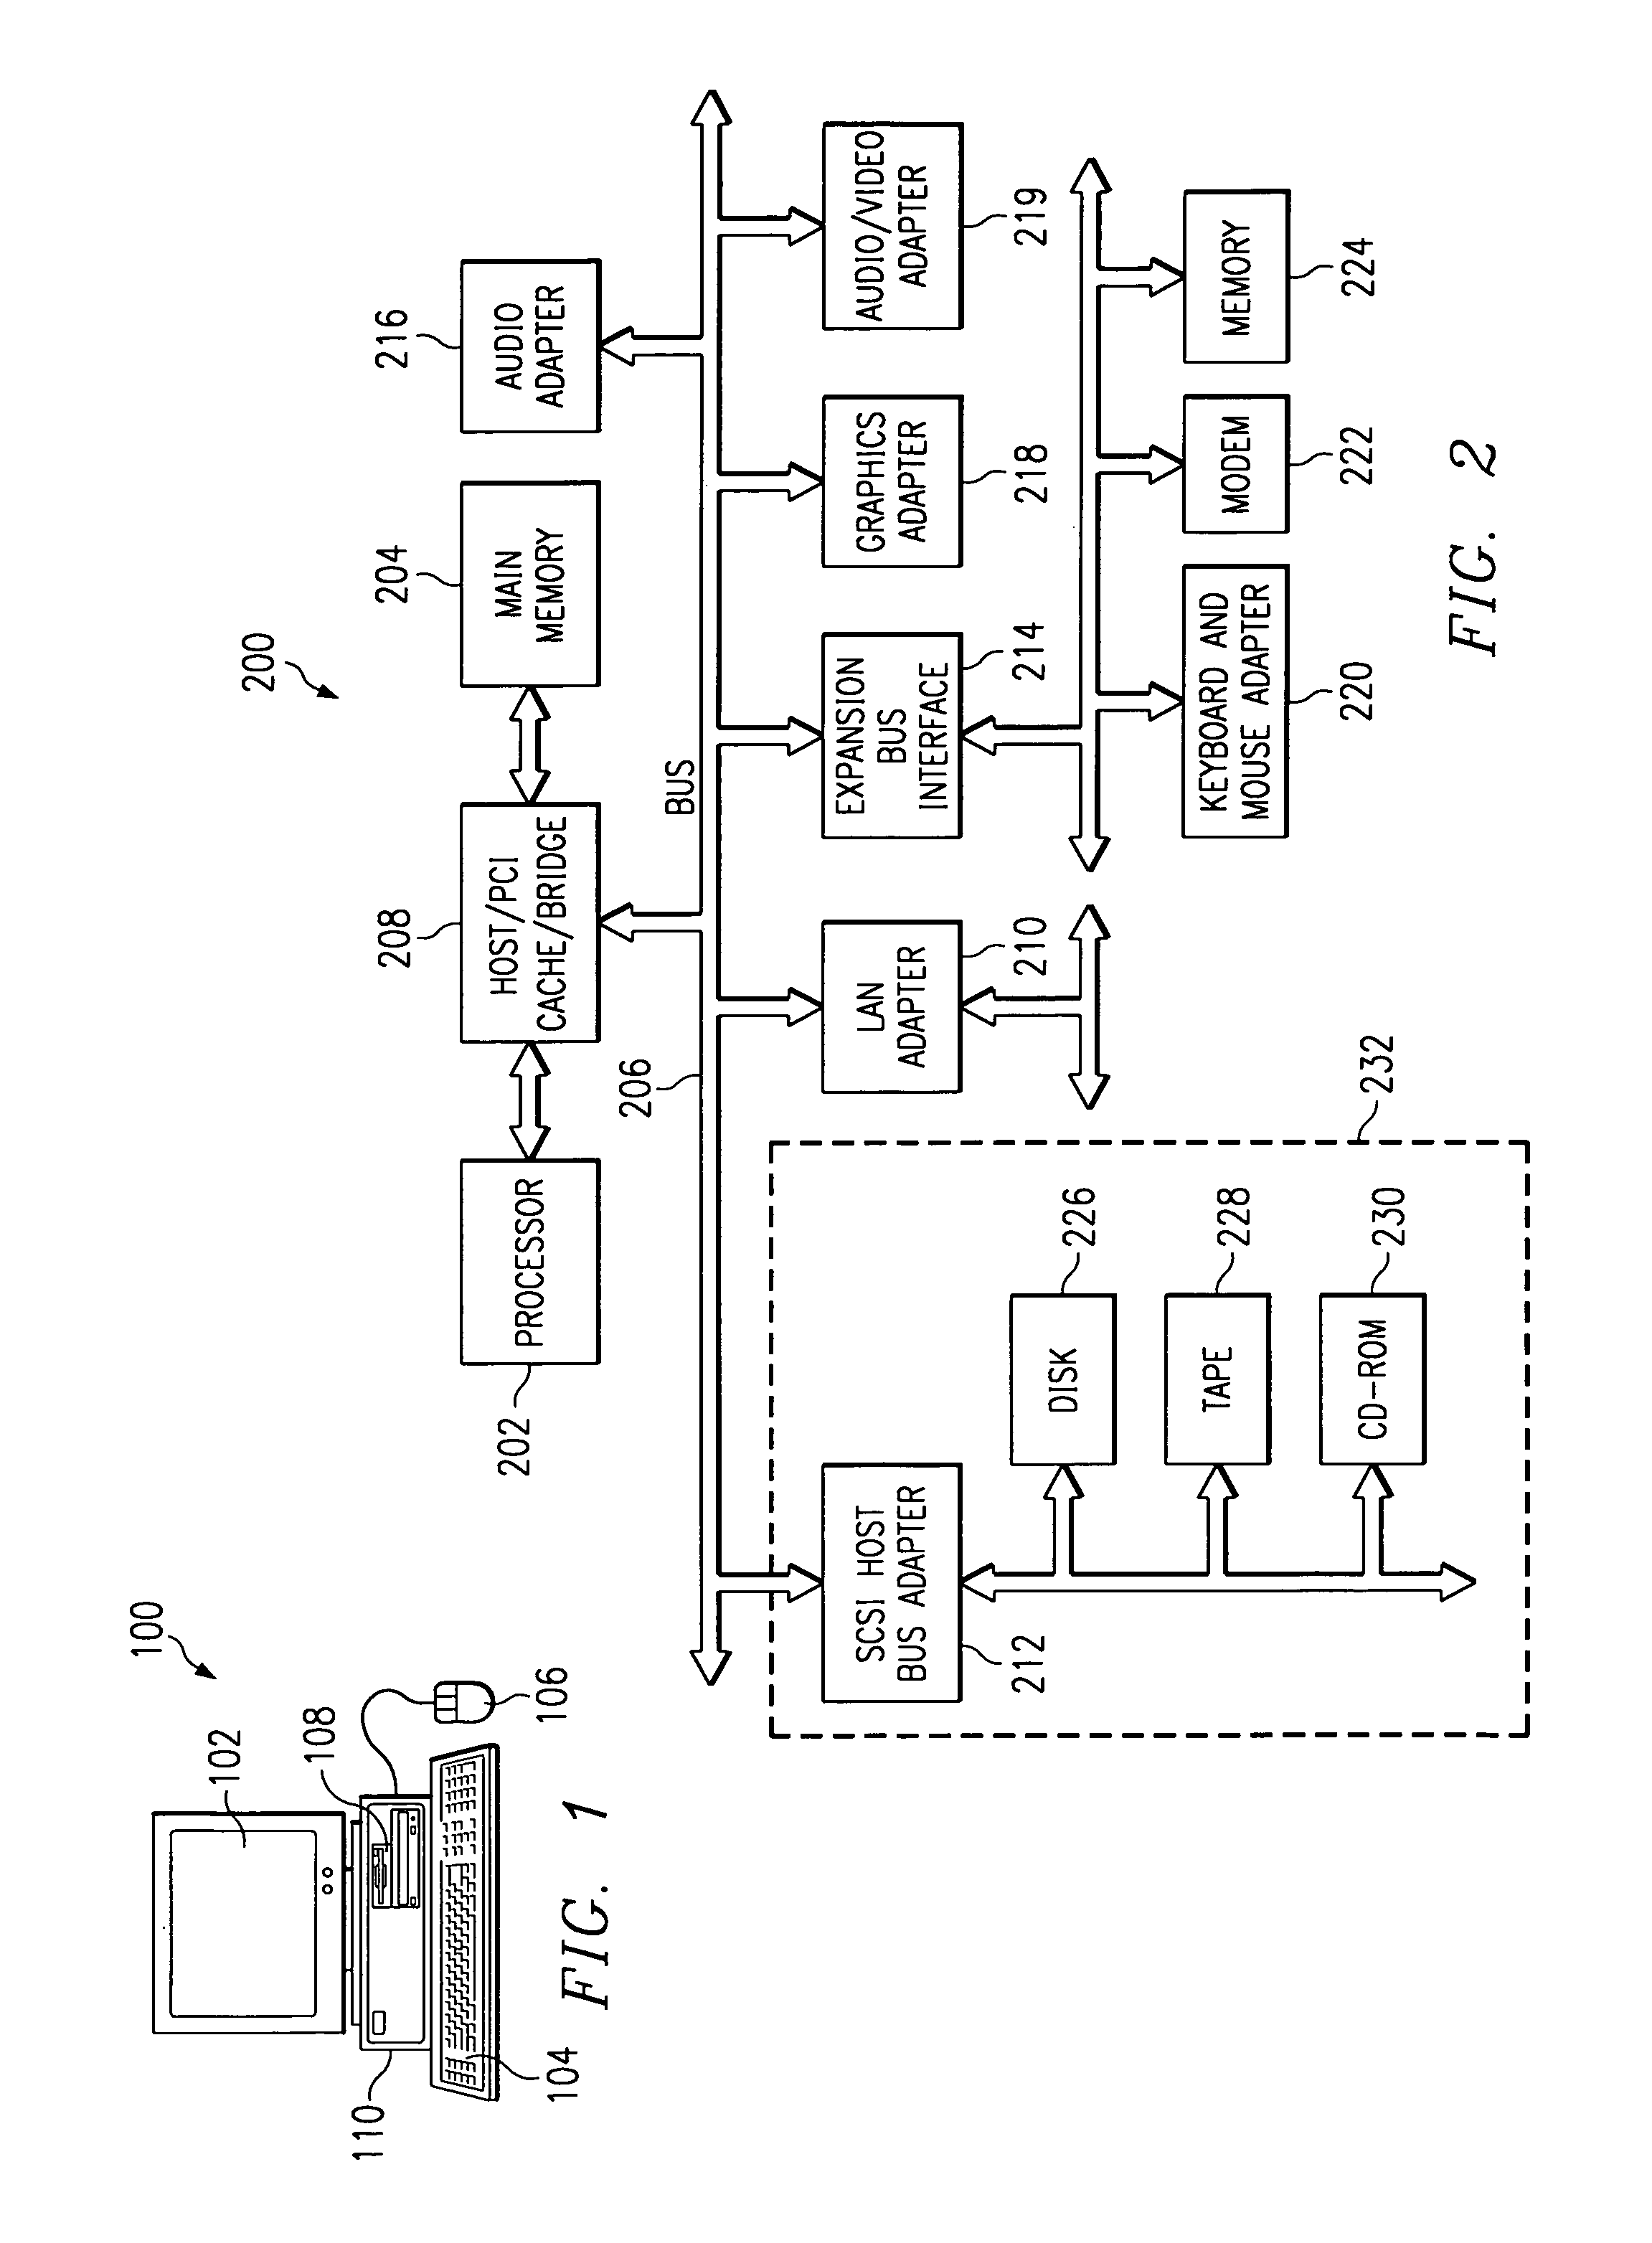 Method and apparatus to debug a program from a predetermined starting point